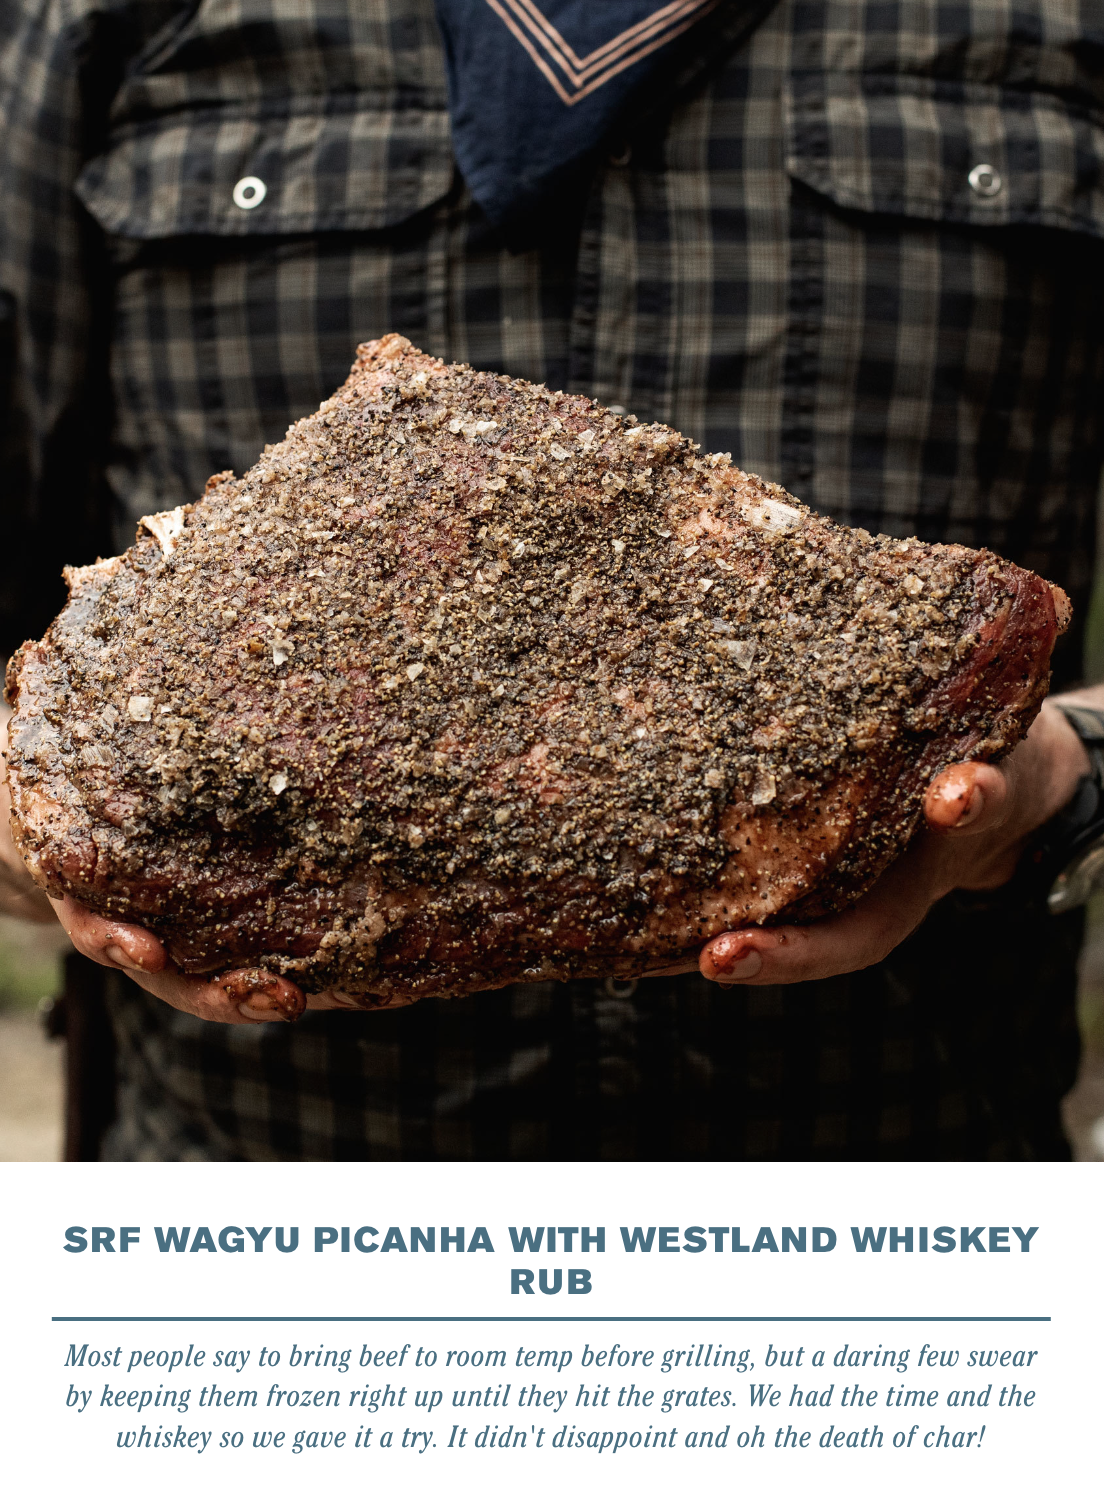  SRF WAGYU PICANHA WITH WESTLAND WHISKEY RUB    Most people say to bring beef to room temp before grilling, but a daring few swear by keeping them frozen right up until they hit the grates. We had the time and the whiskey so we gave it a try. It didn